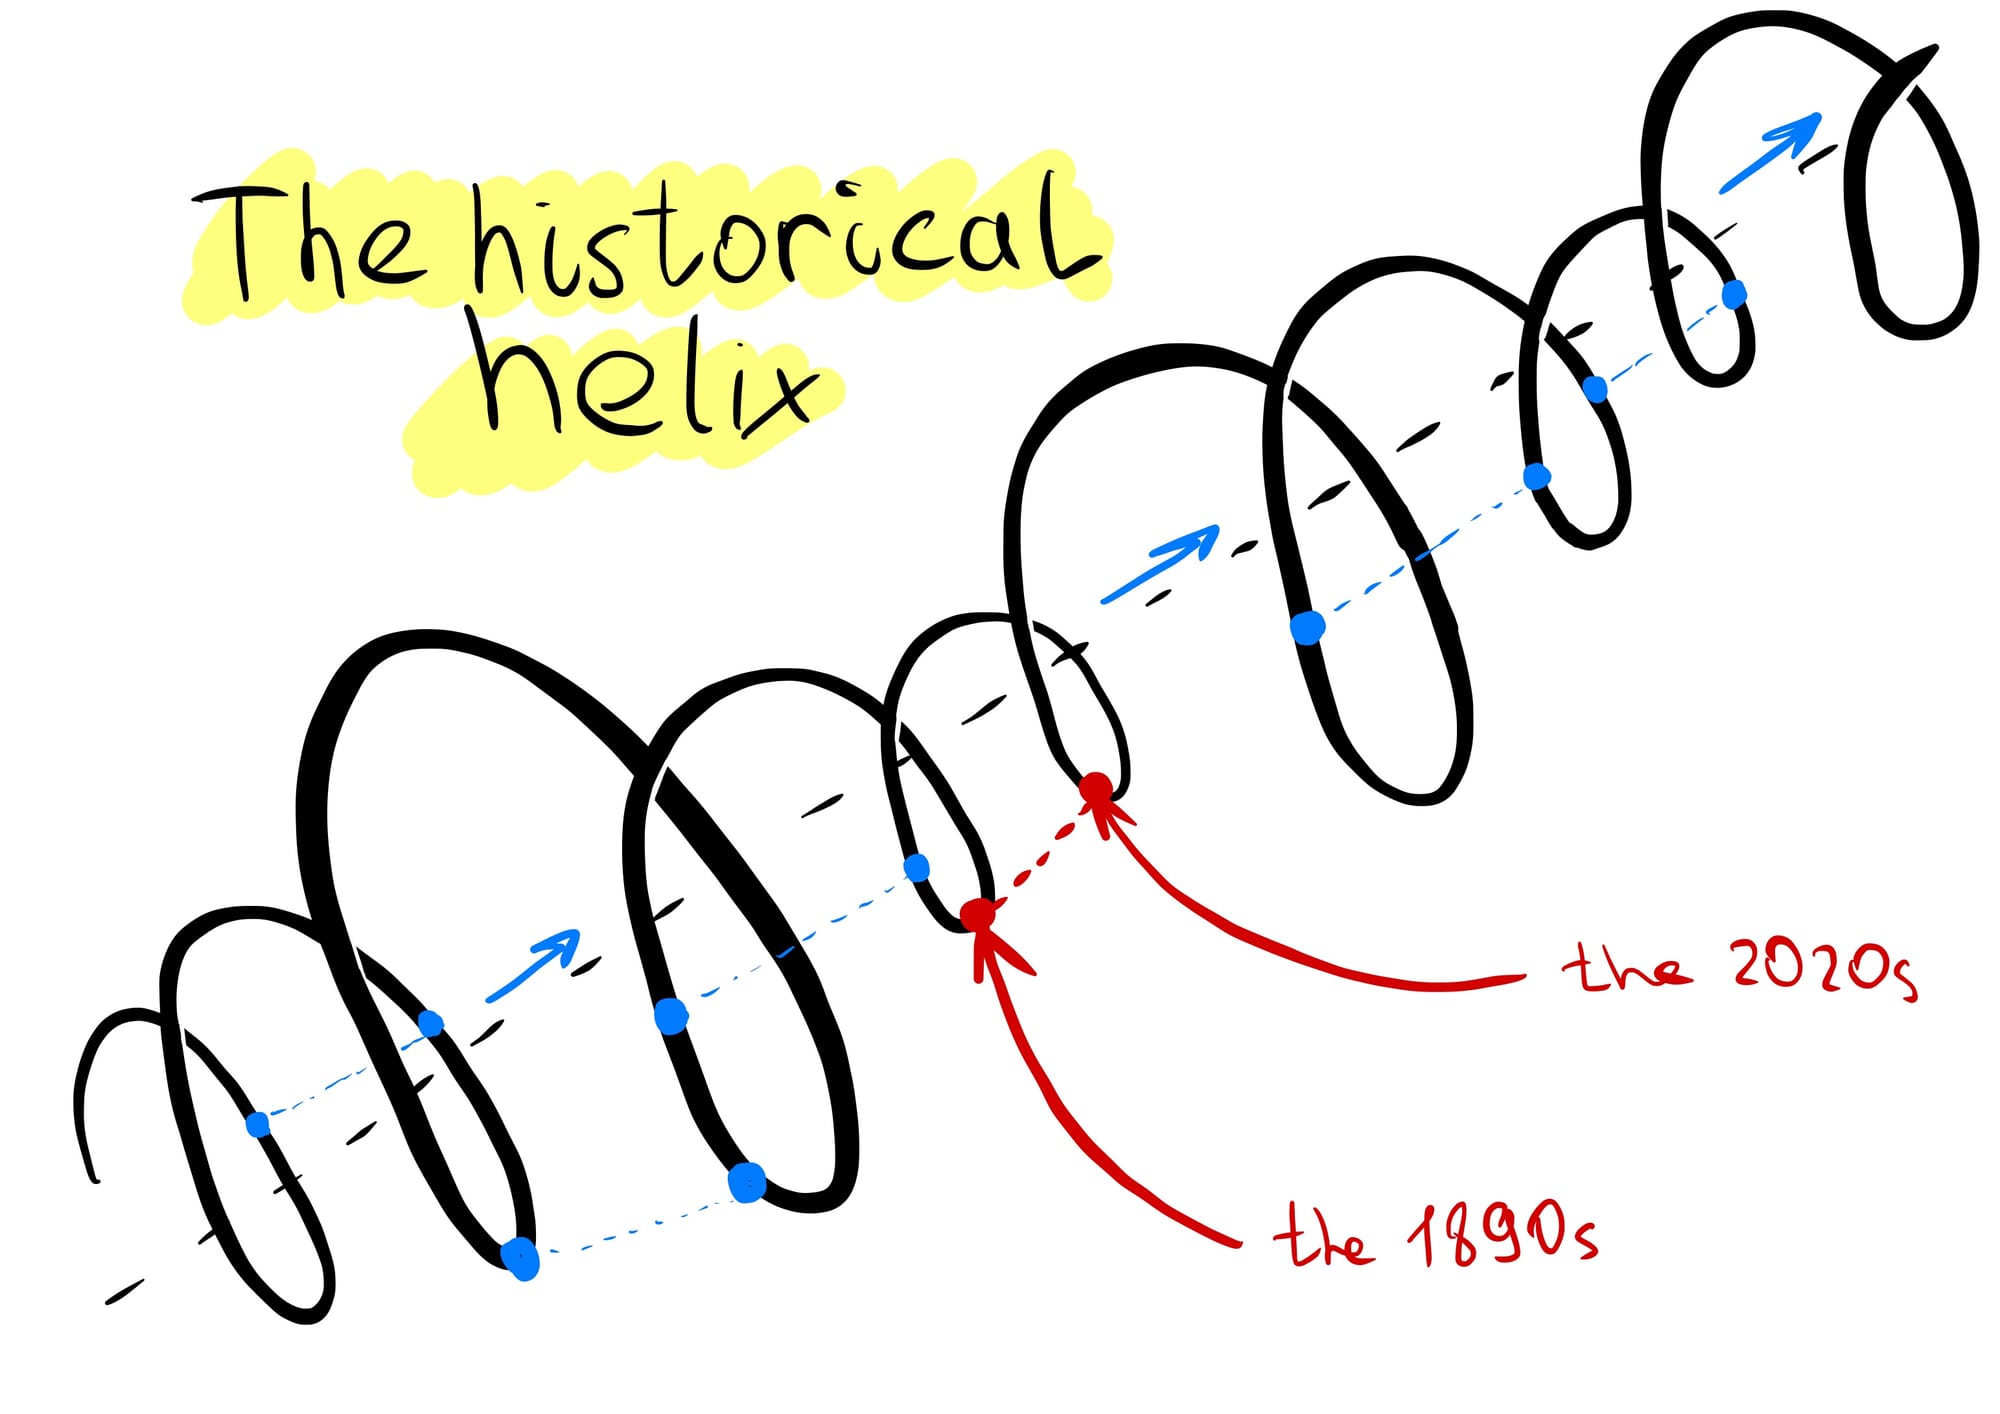 A sketch of the historical helix